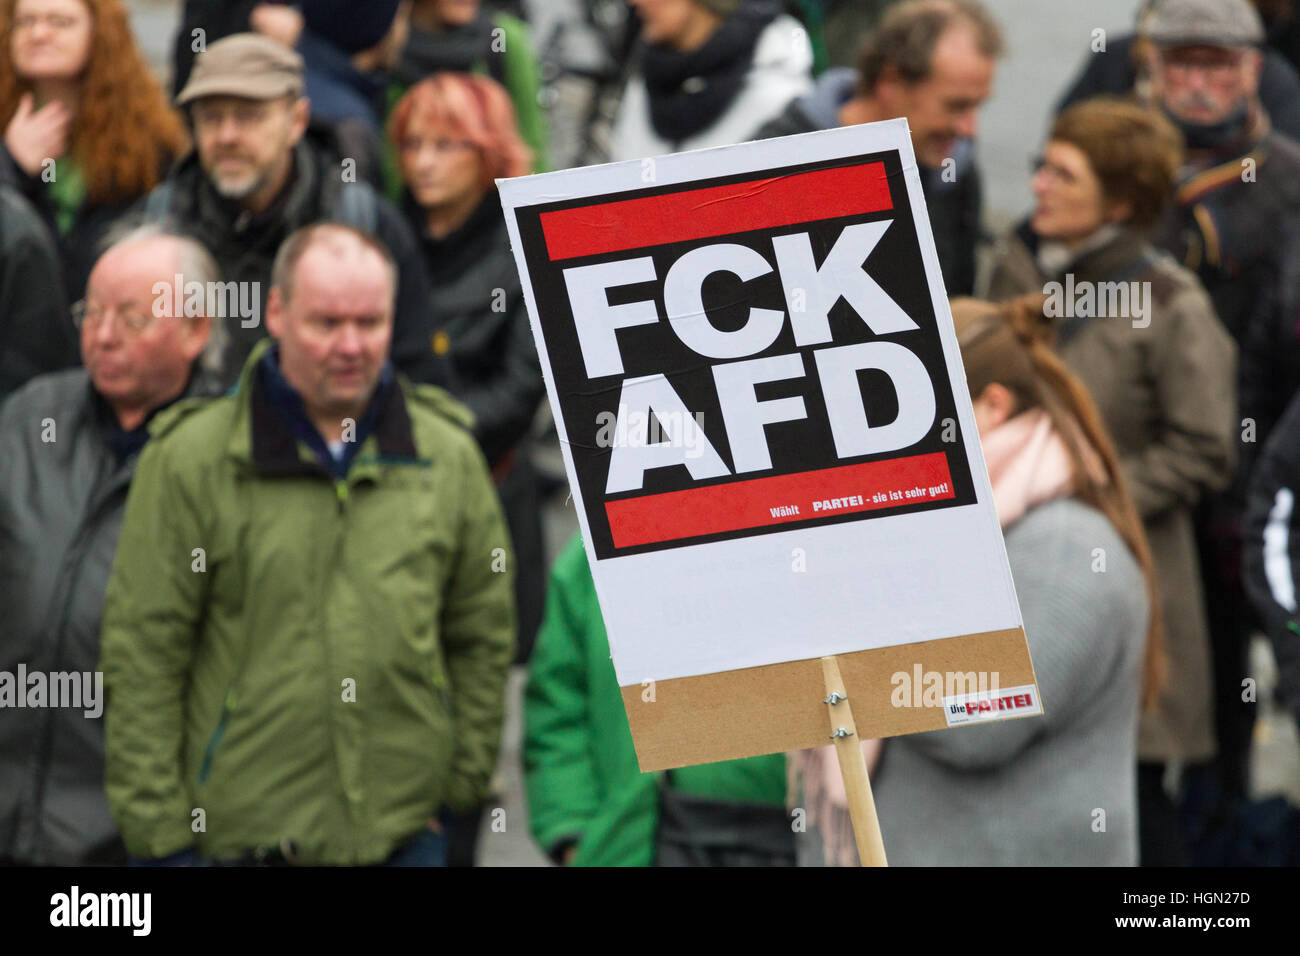 An anti-AfD placard at a demonstration in Germany Stock Photo